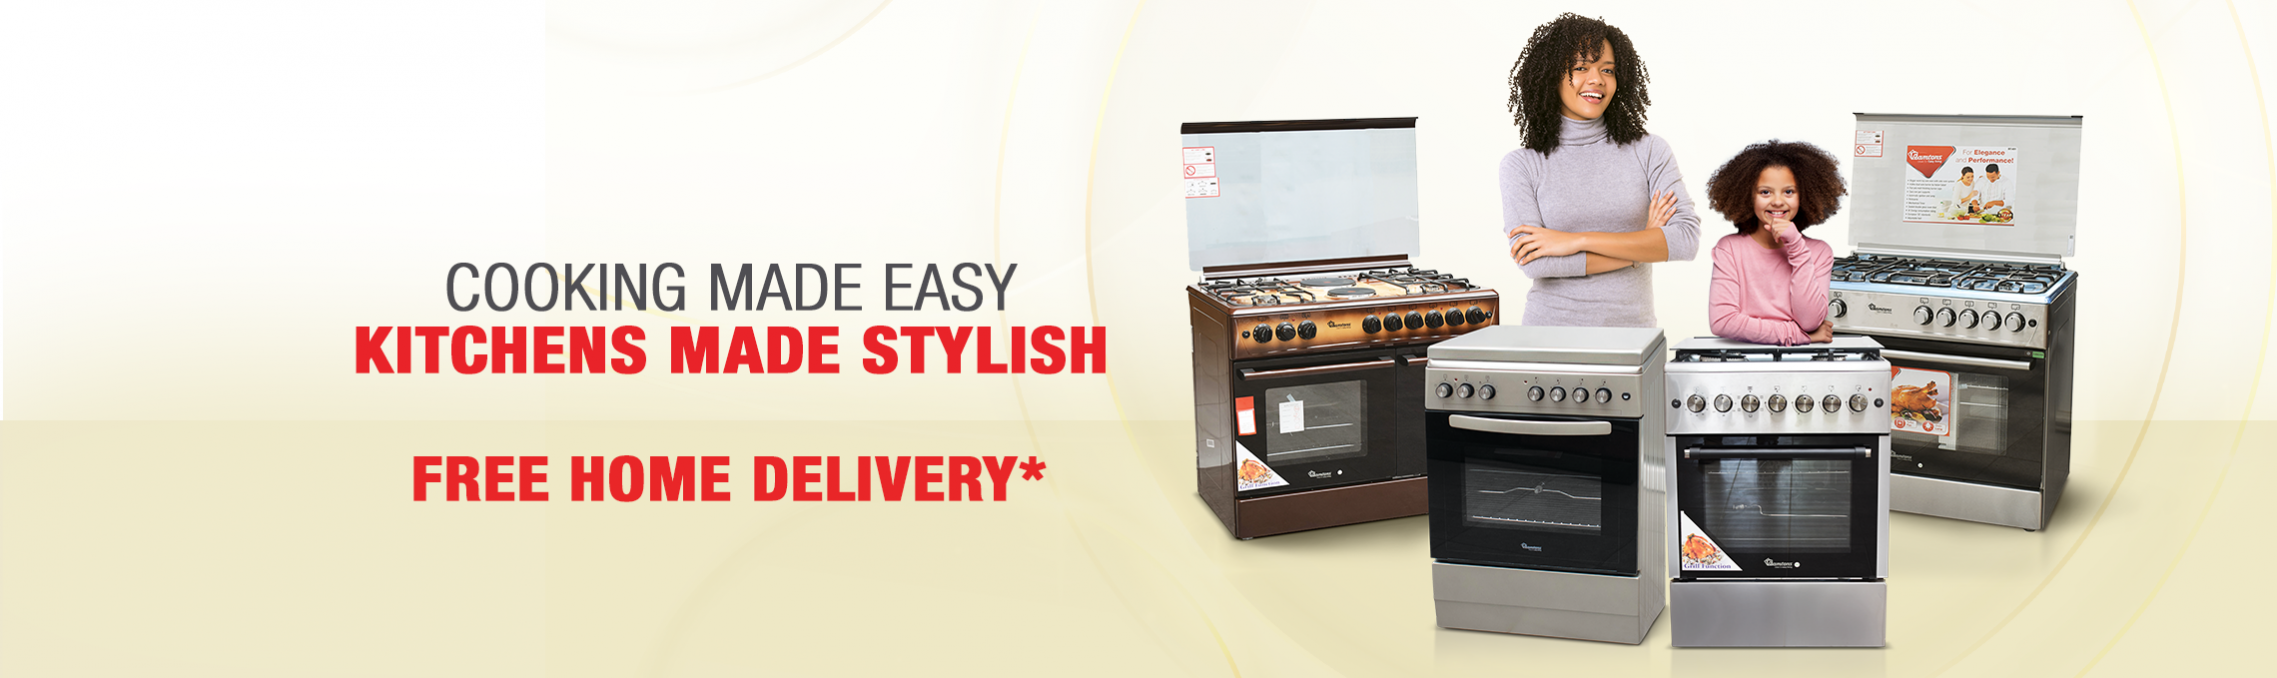 Standing Cookers - Cooking Made Easy, Kitchen Made Stylish-free Home Delivery |ramtons